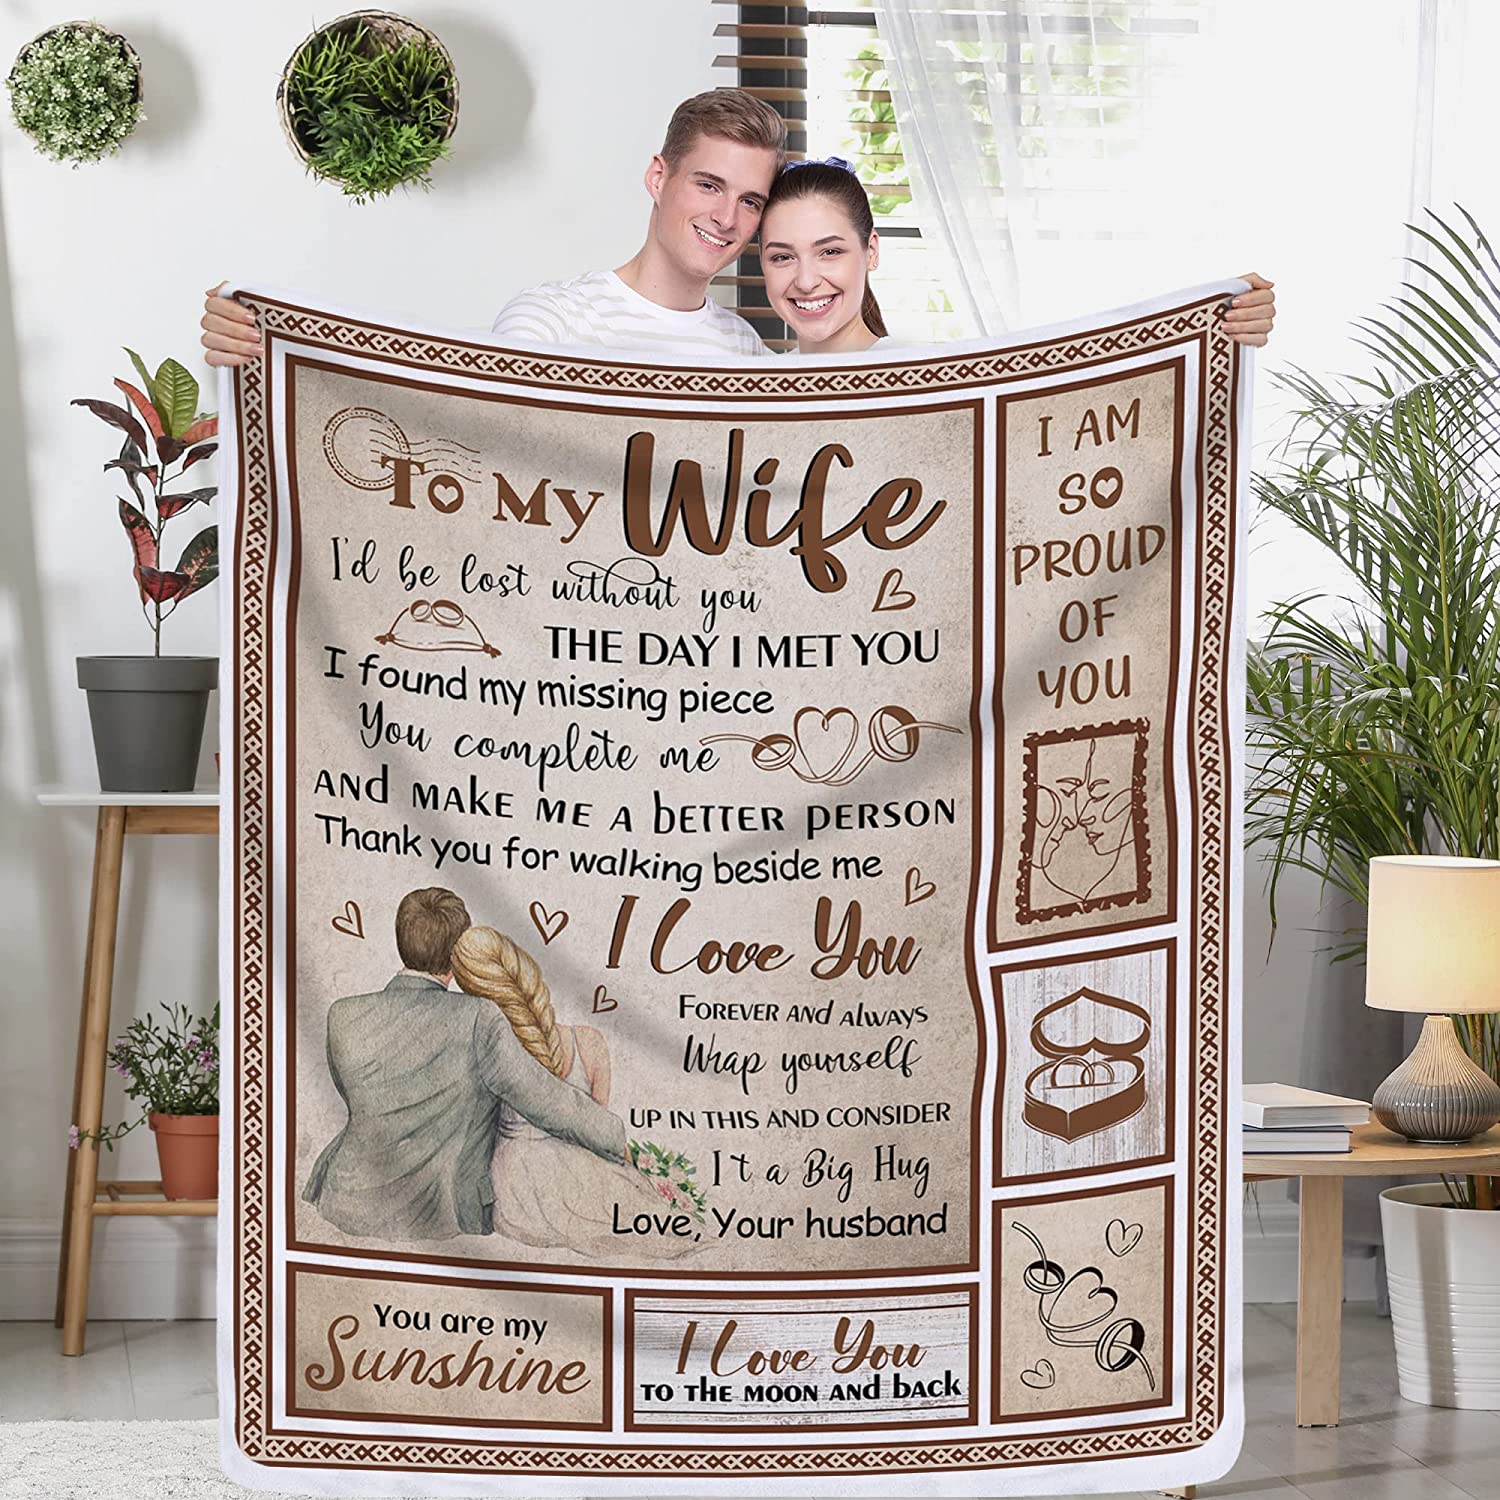 Wife Gift Blanket, To My Wife Blanket from Husband, Gifts for Her - Christmas Birthday Anniversary Blanket, Romantic Valentine’s Day Gifts Idea for Wife